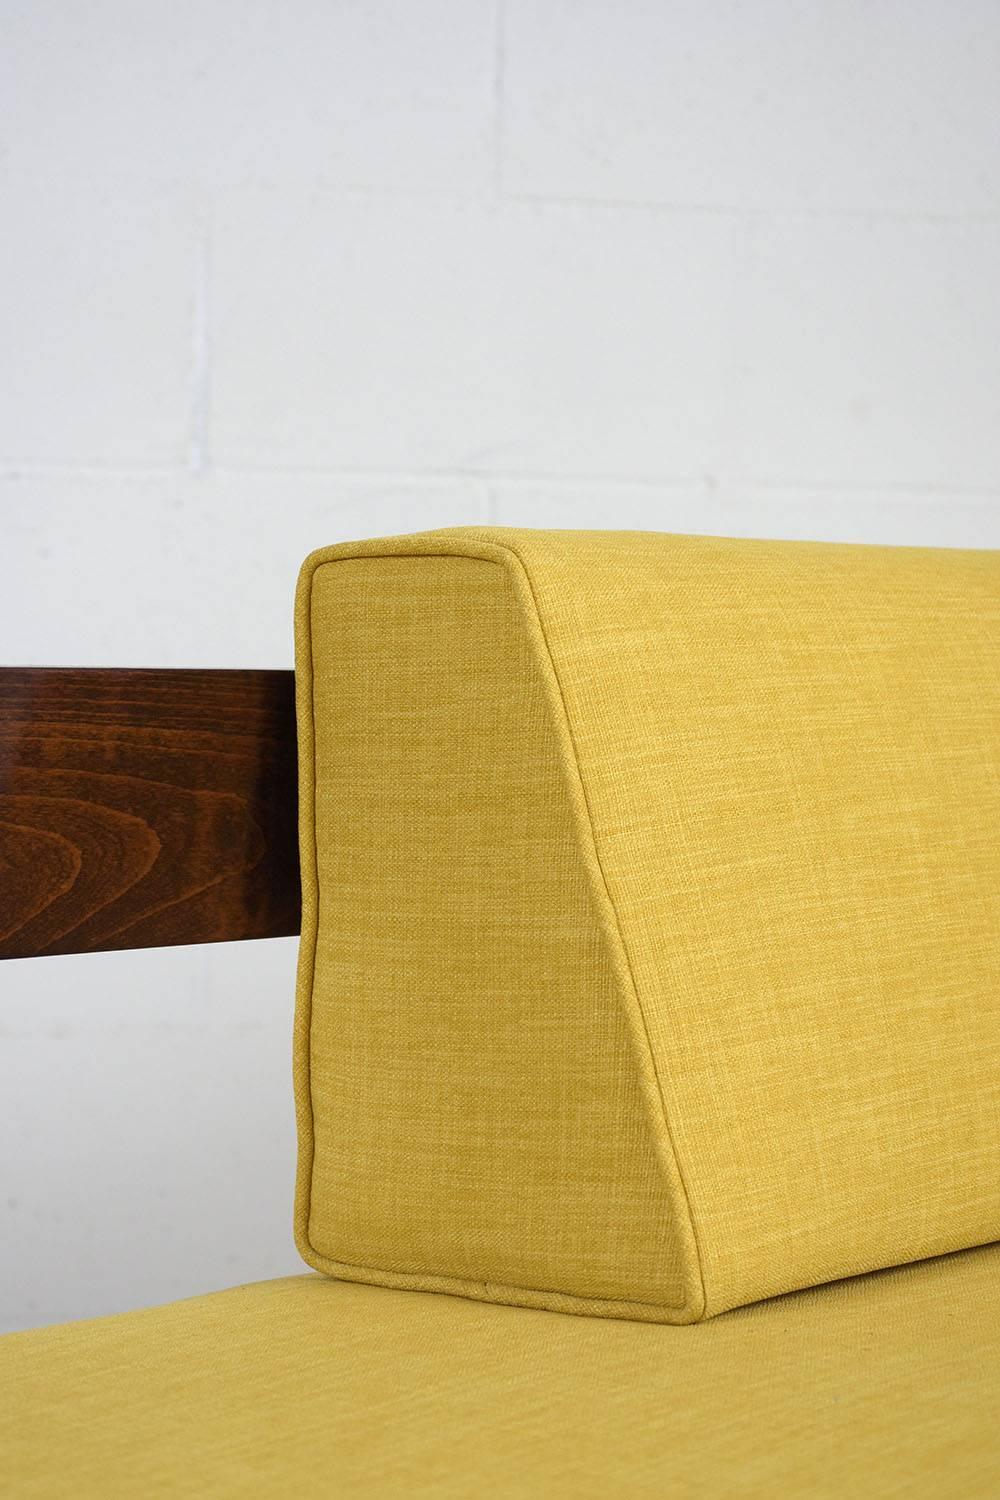 Midcentury Adrian Pearsall Sofa with Side Tables 2